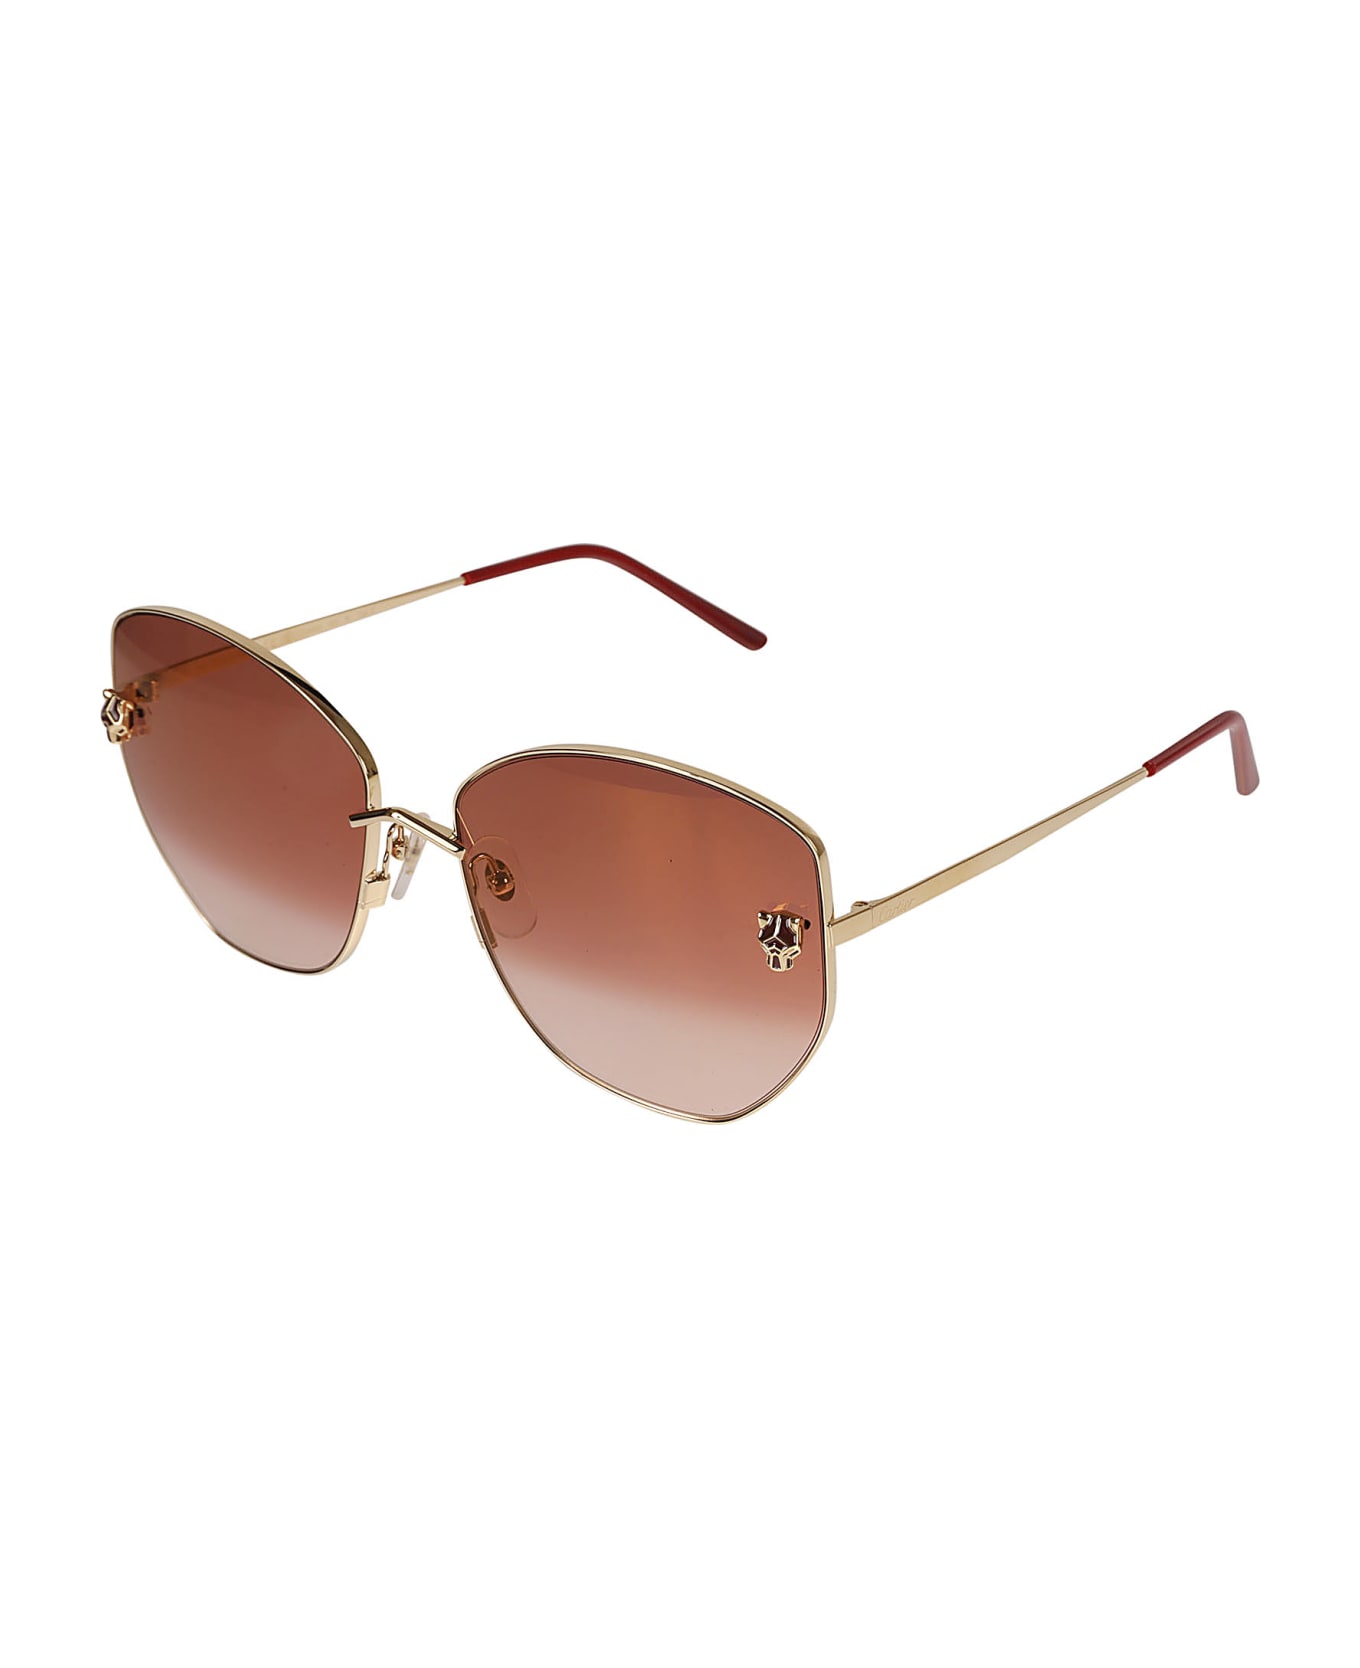 Cartier Eyewear Curve Square Sunglasses - Gold/Red